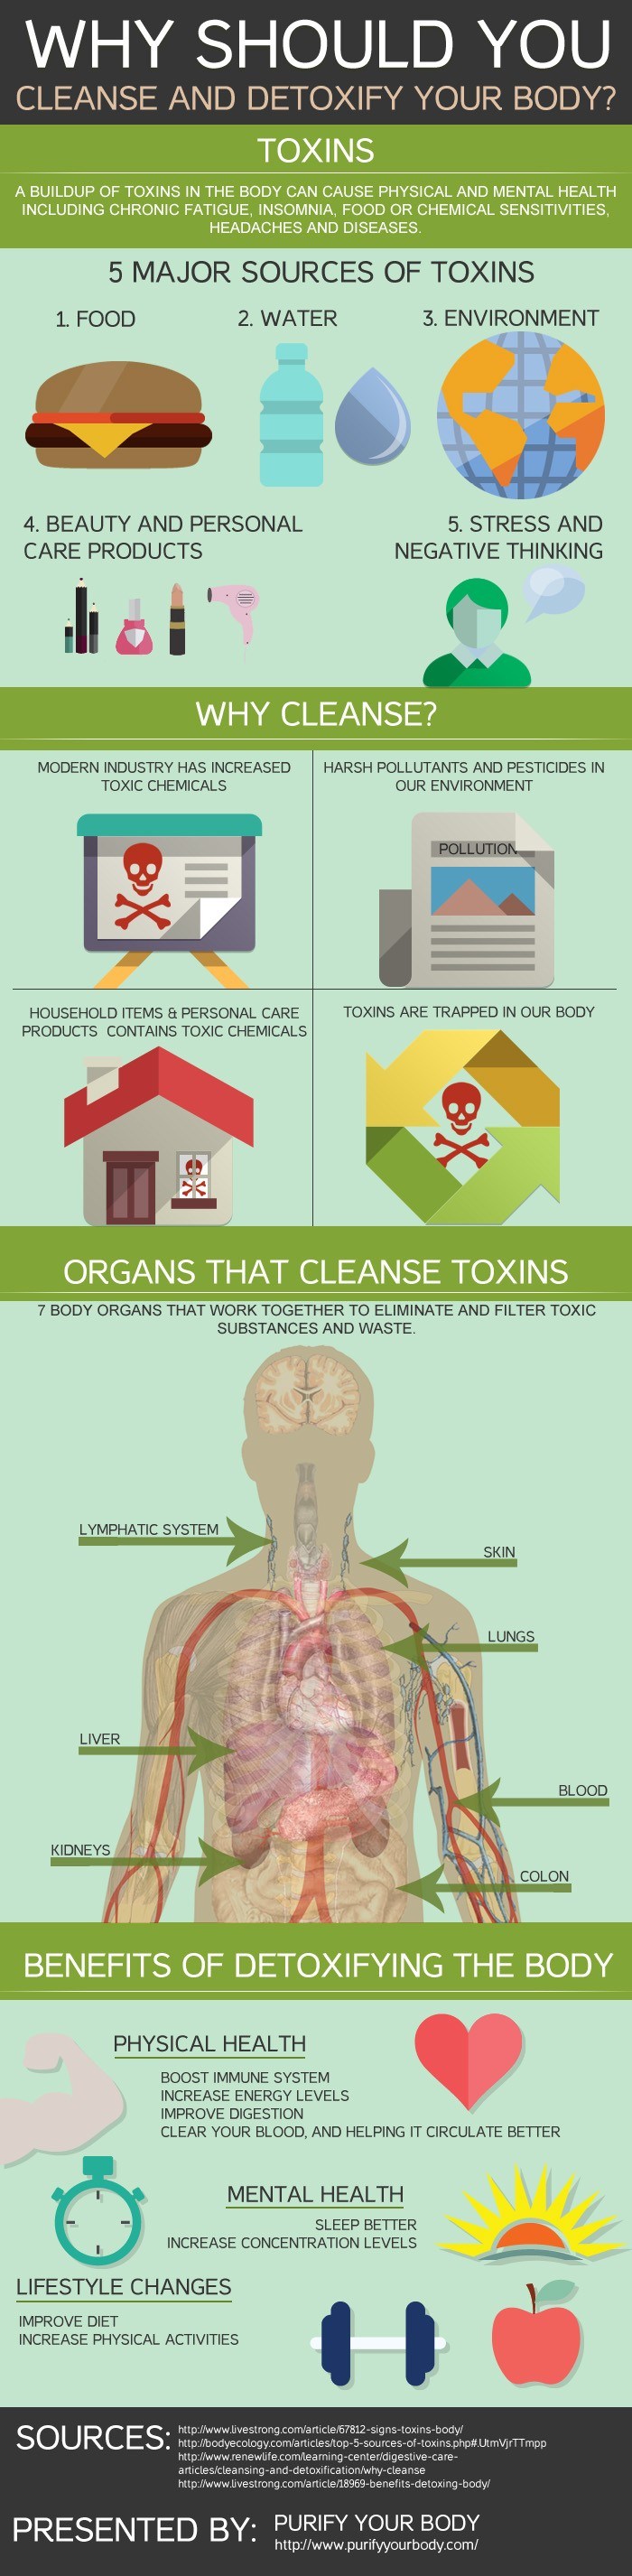 Why You Should Cleanse and Detox Your Body Infographic